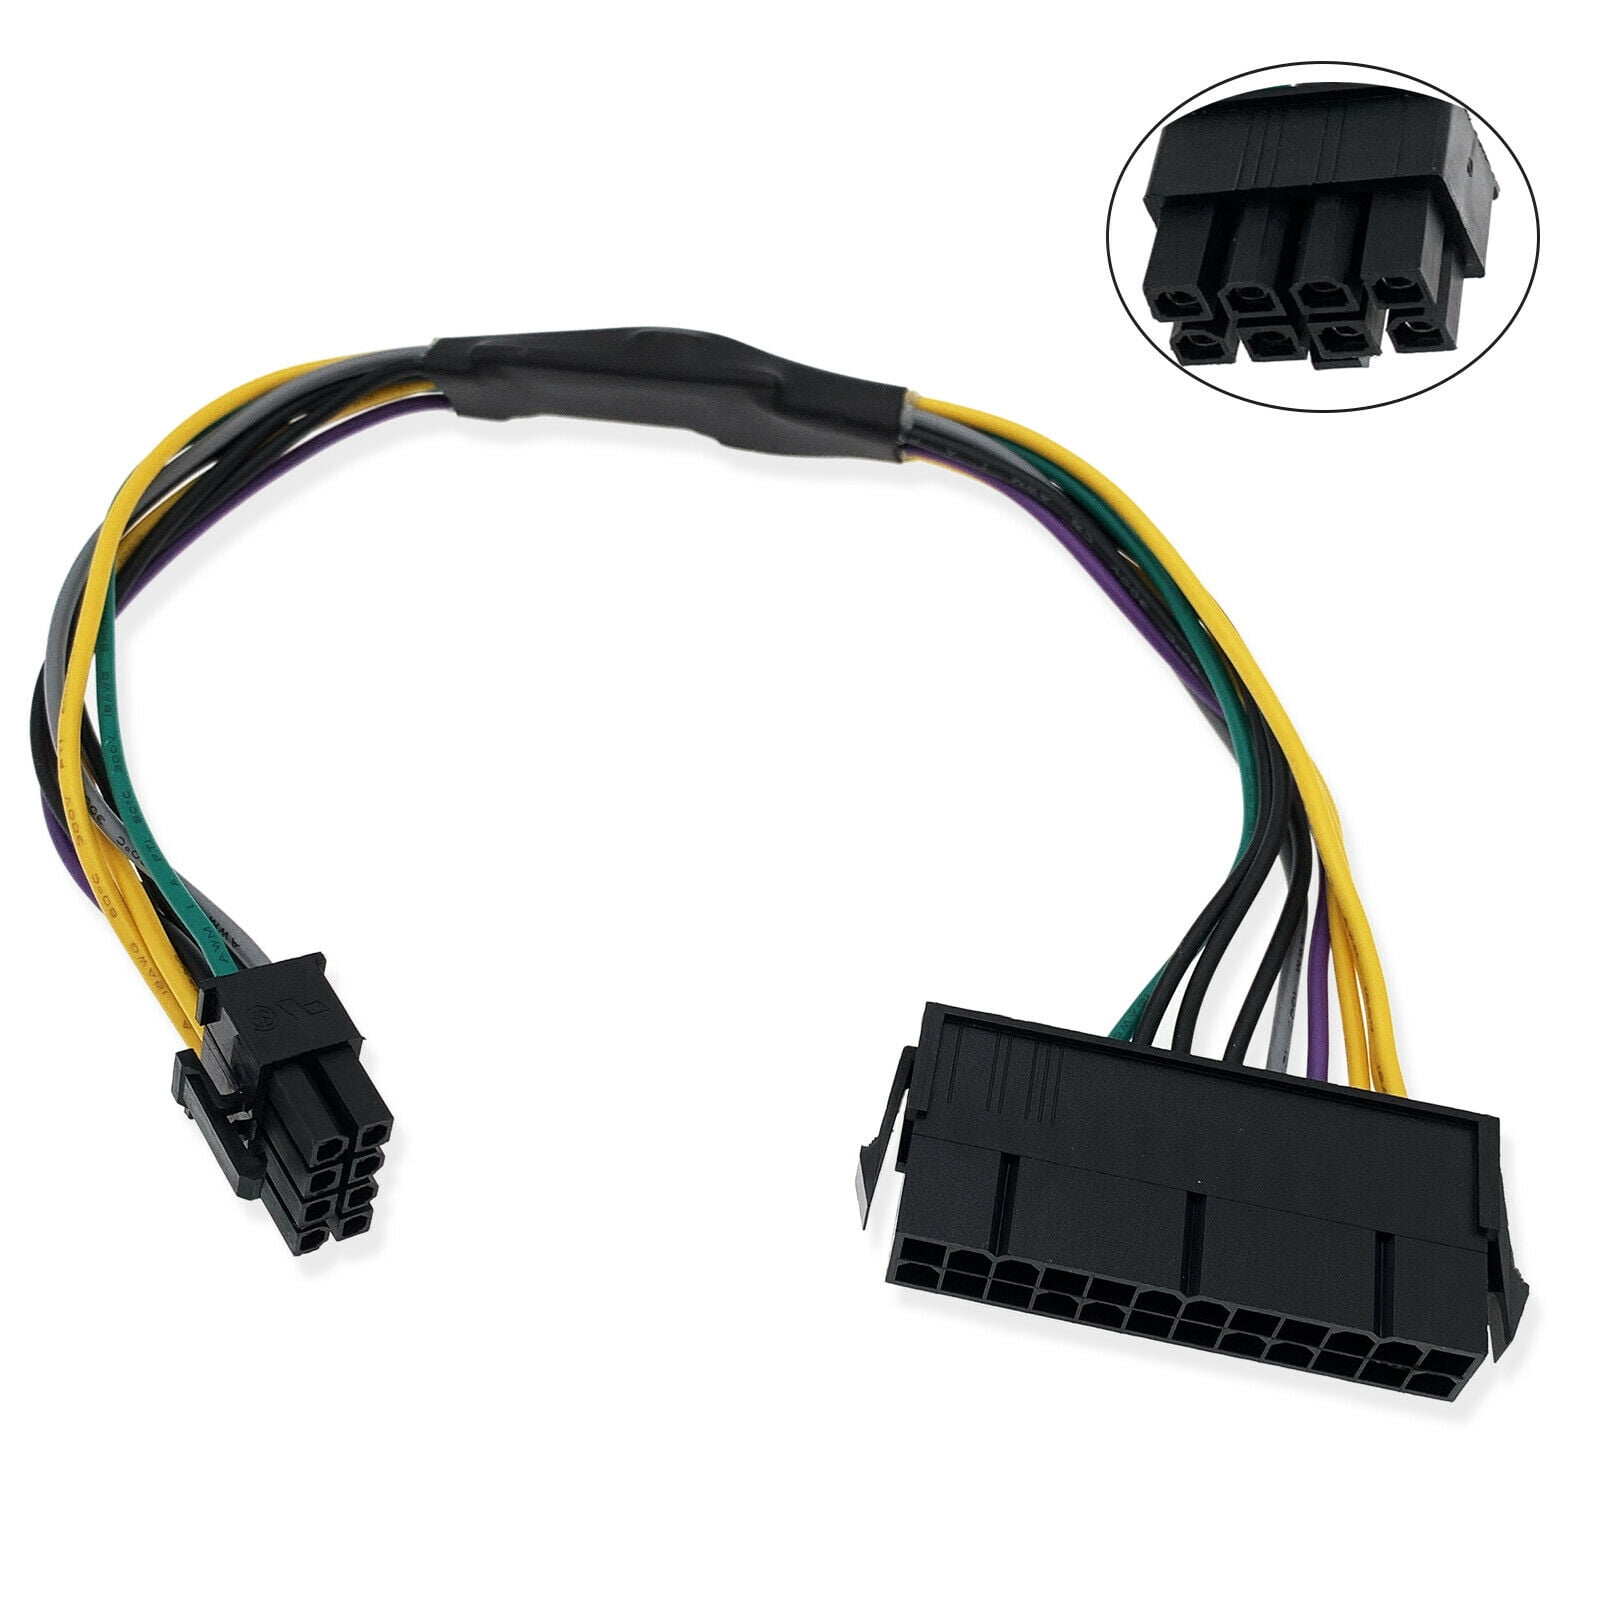 HQRP Coaster HQRP 6ft Rectangle AC Cord for Dell Precision 690 2R328 Tower Mains Cable Power